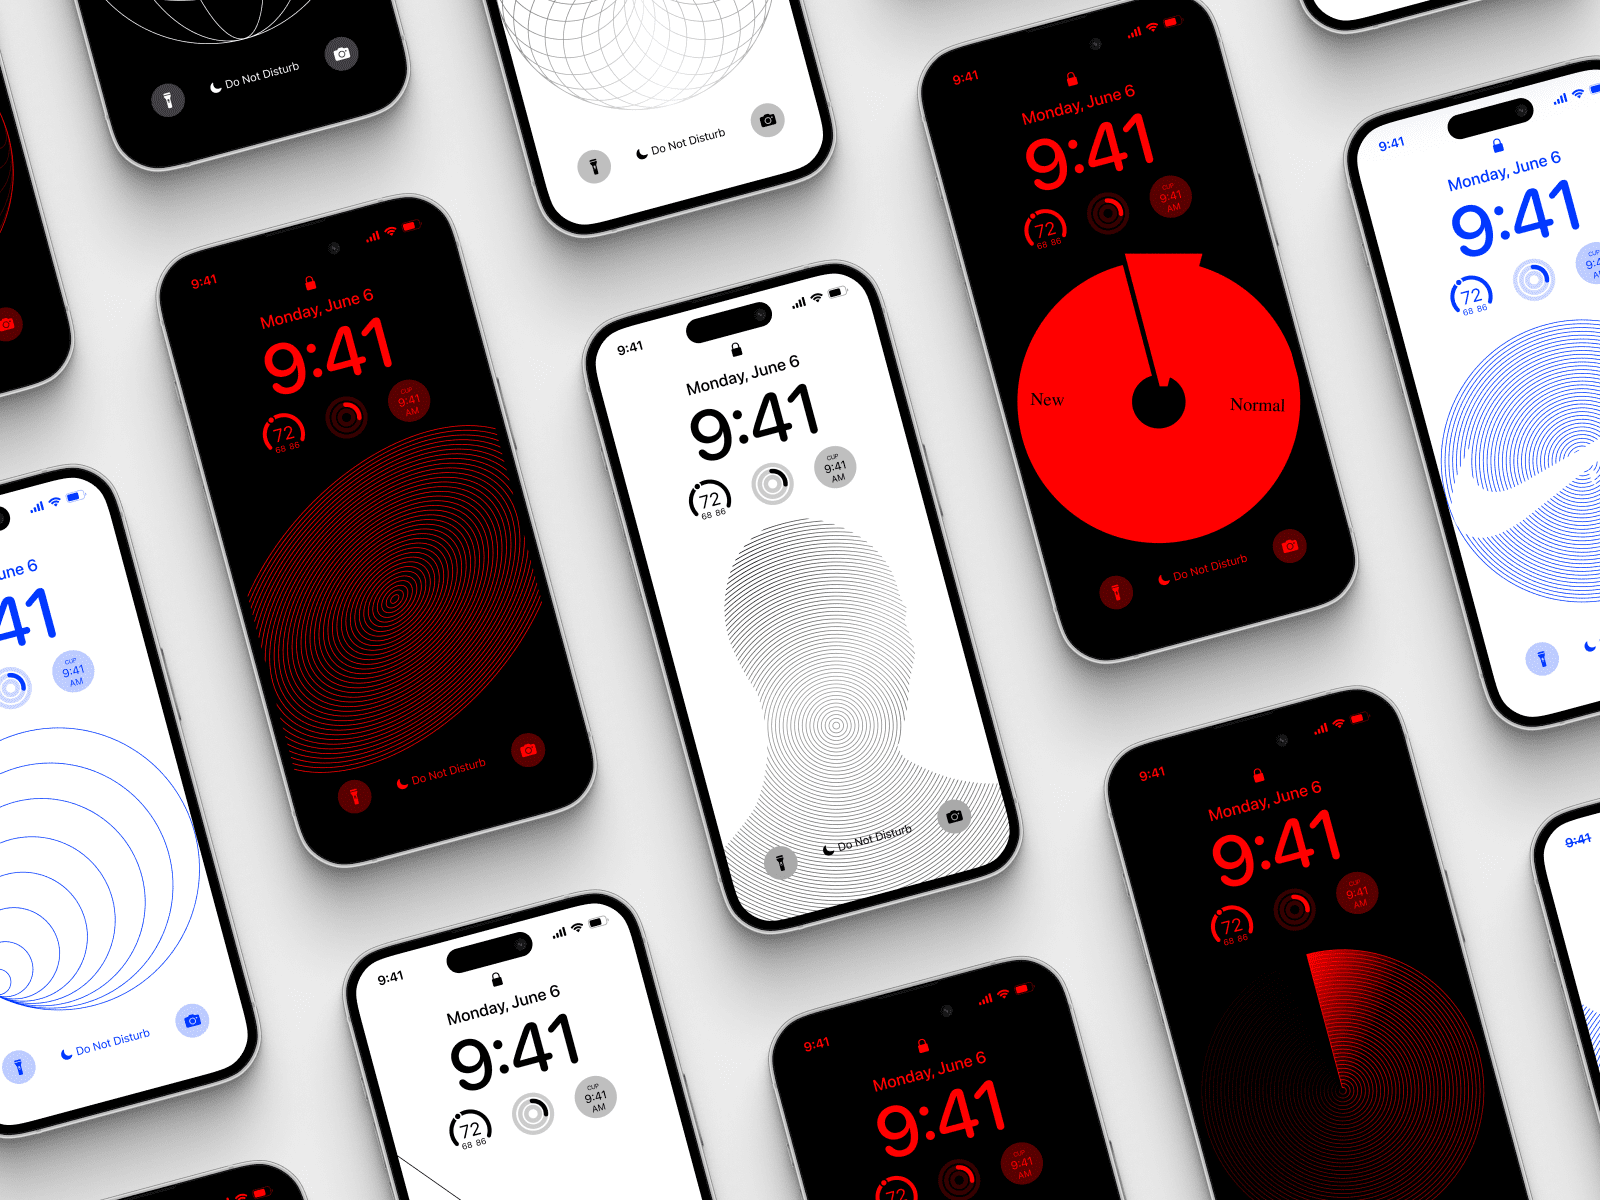 Top 999+ Black Aesthetic Wallpaper Full HD, 4K✓Free to Use